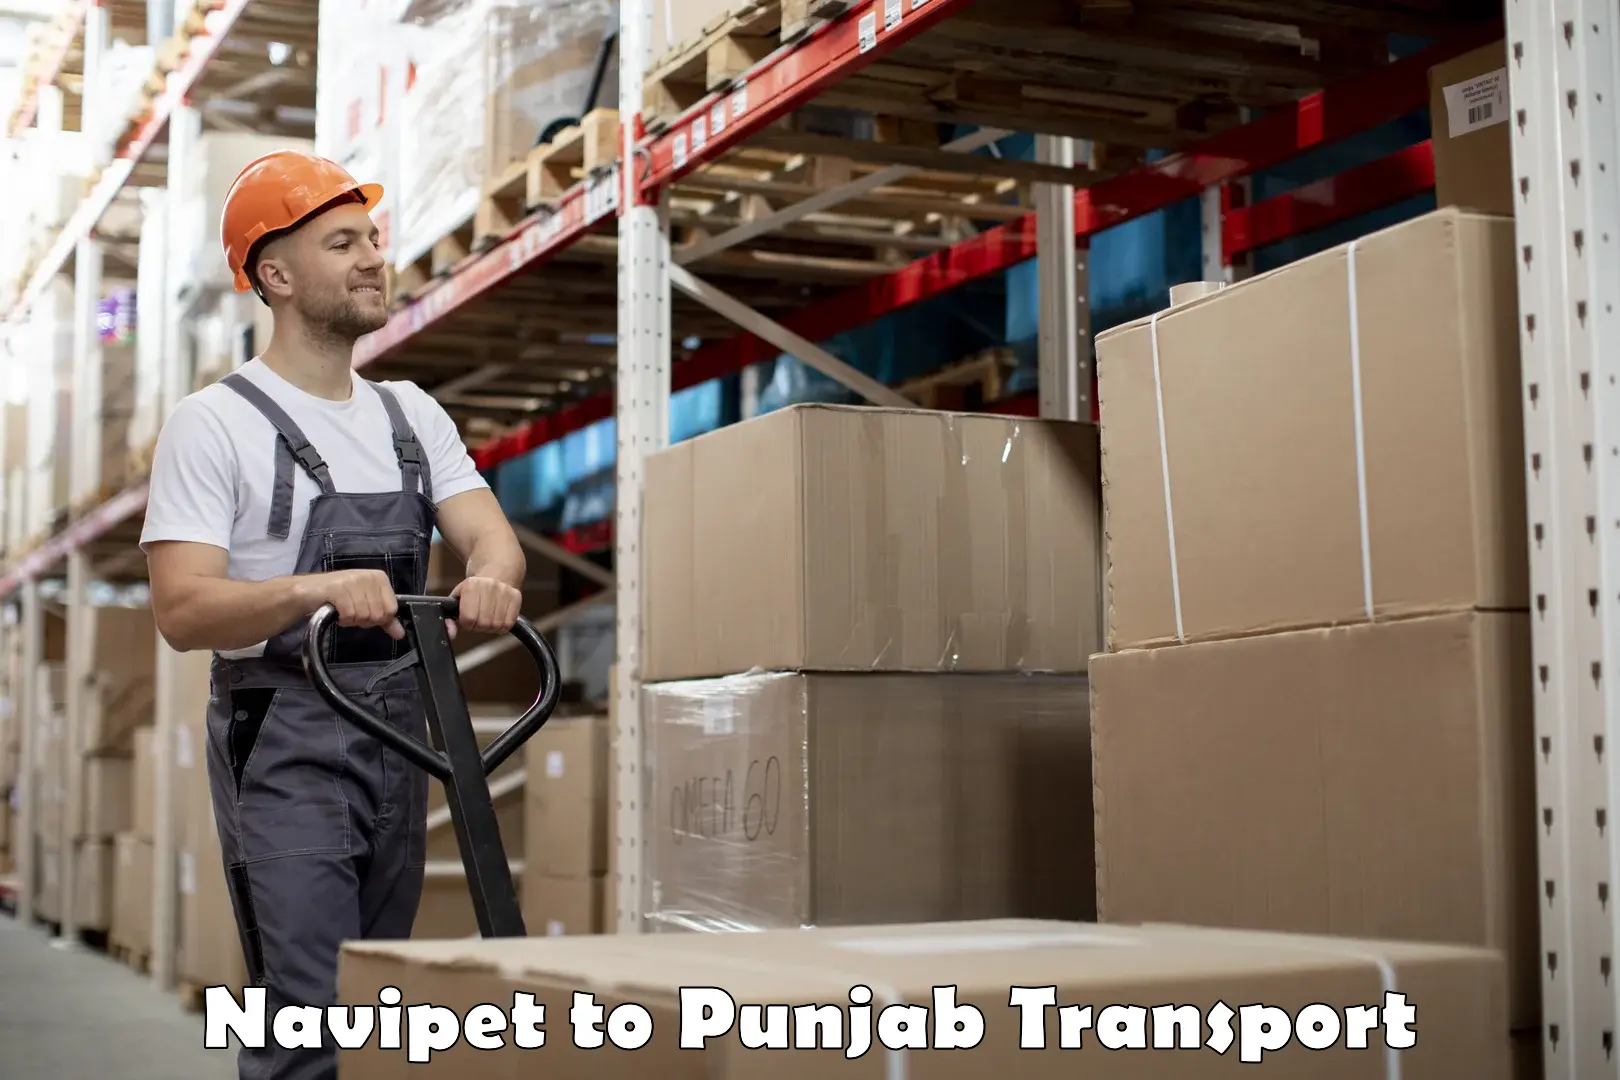 Express transport services Navipet to Patiala